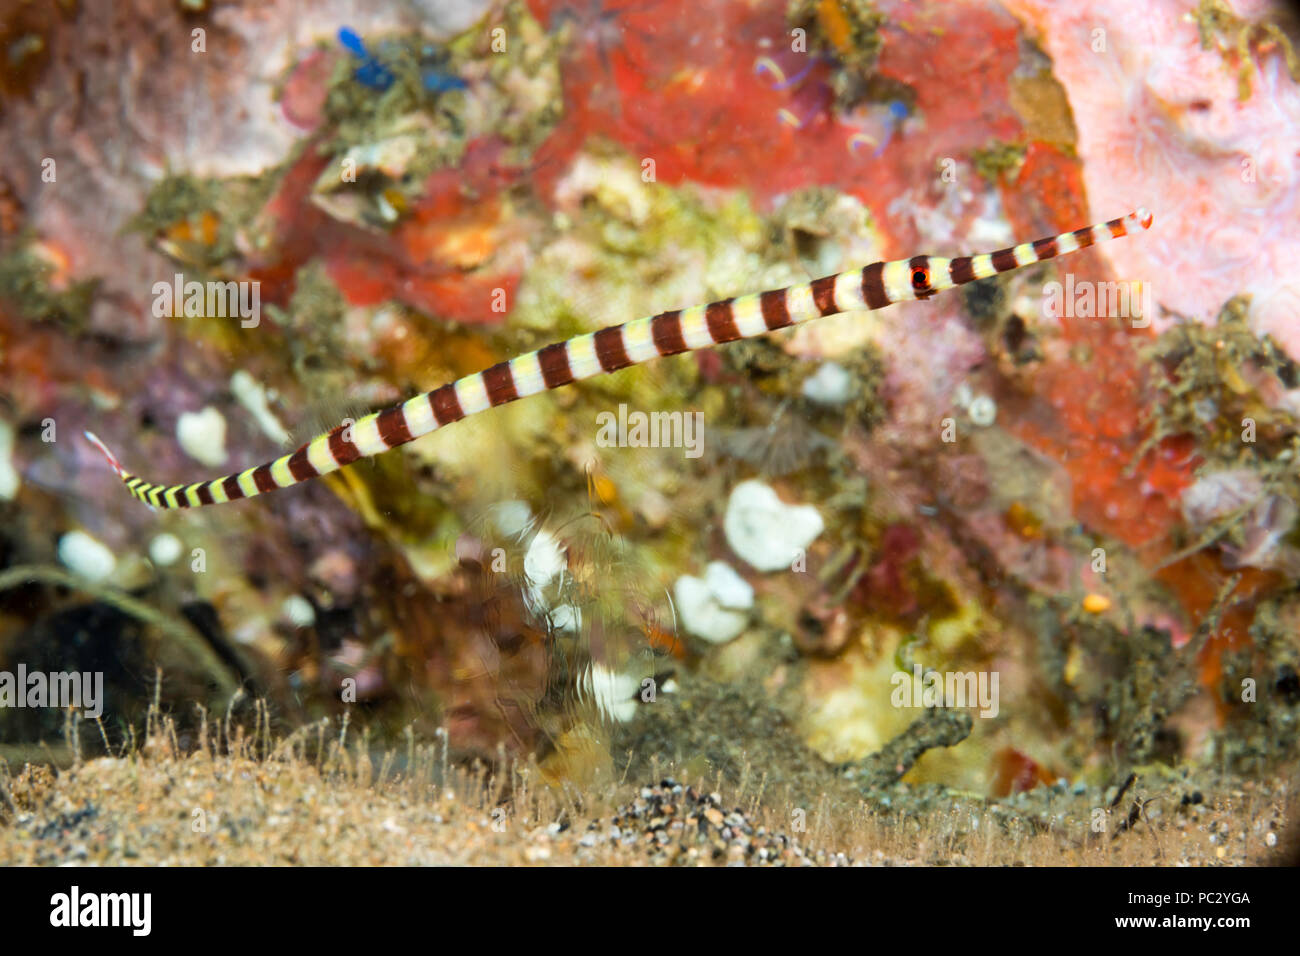 This female banded pipefish, Dunckerocampus dactyliophorus, is pictured above a sandy bottom covered with skeleton shrimp, Caprellide sp. Countless nu Stock Photo